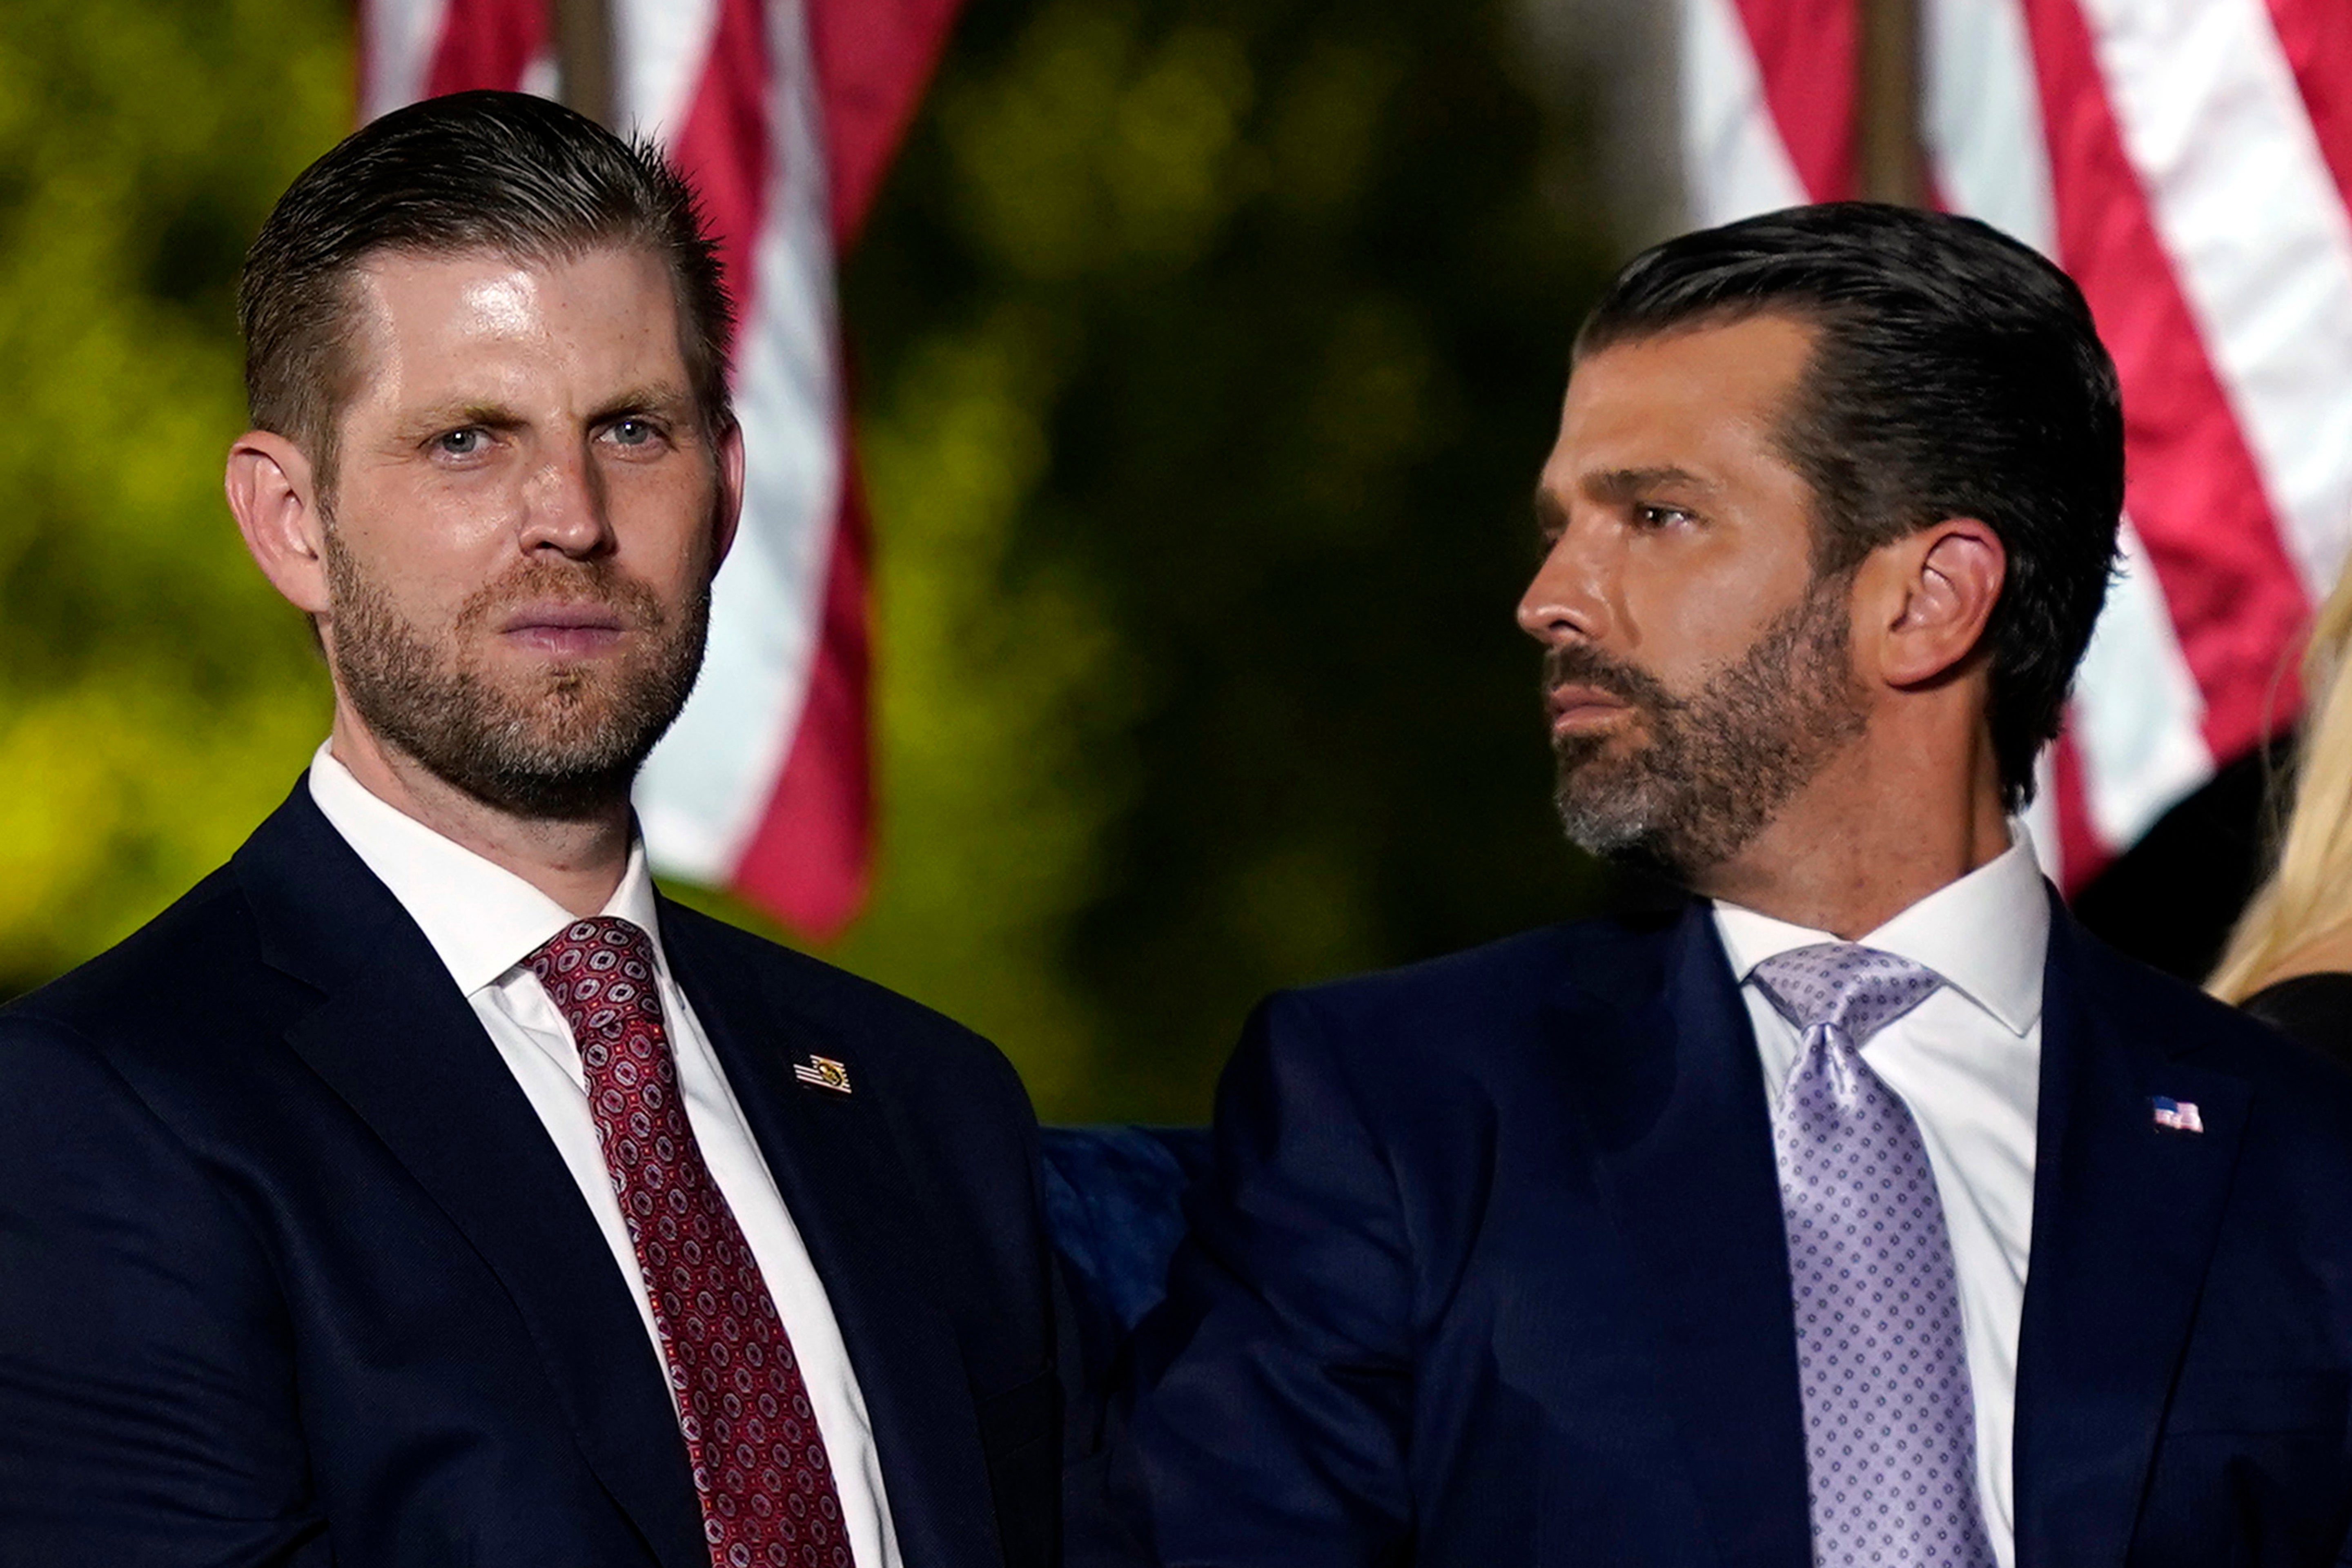 Eric Trump and Donald Trump Jr attend a speech by their father at the White House in August 2020